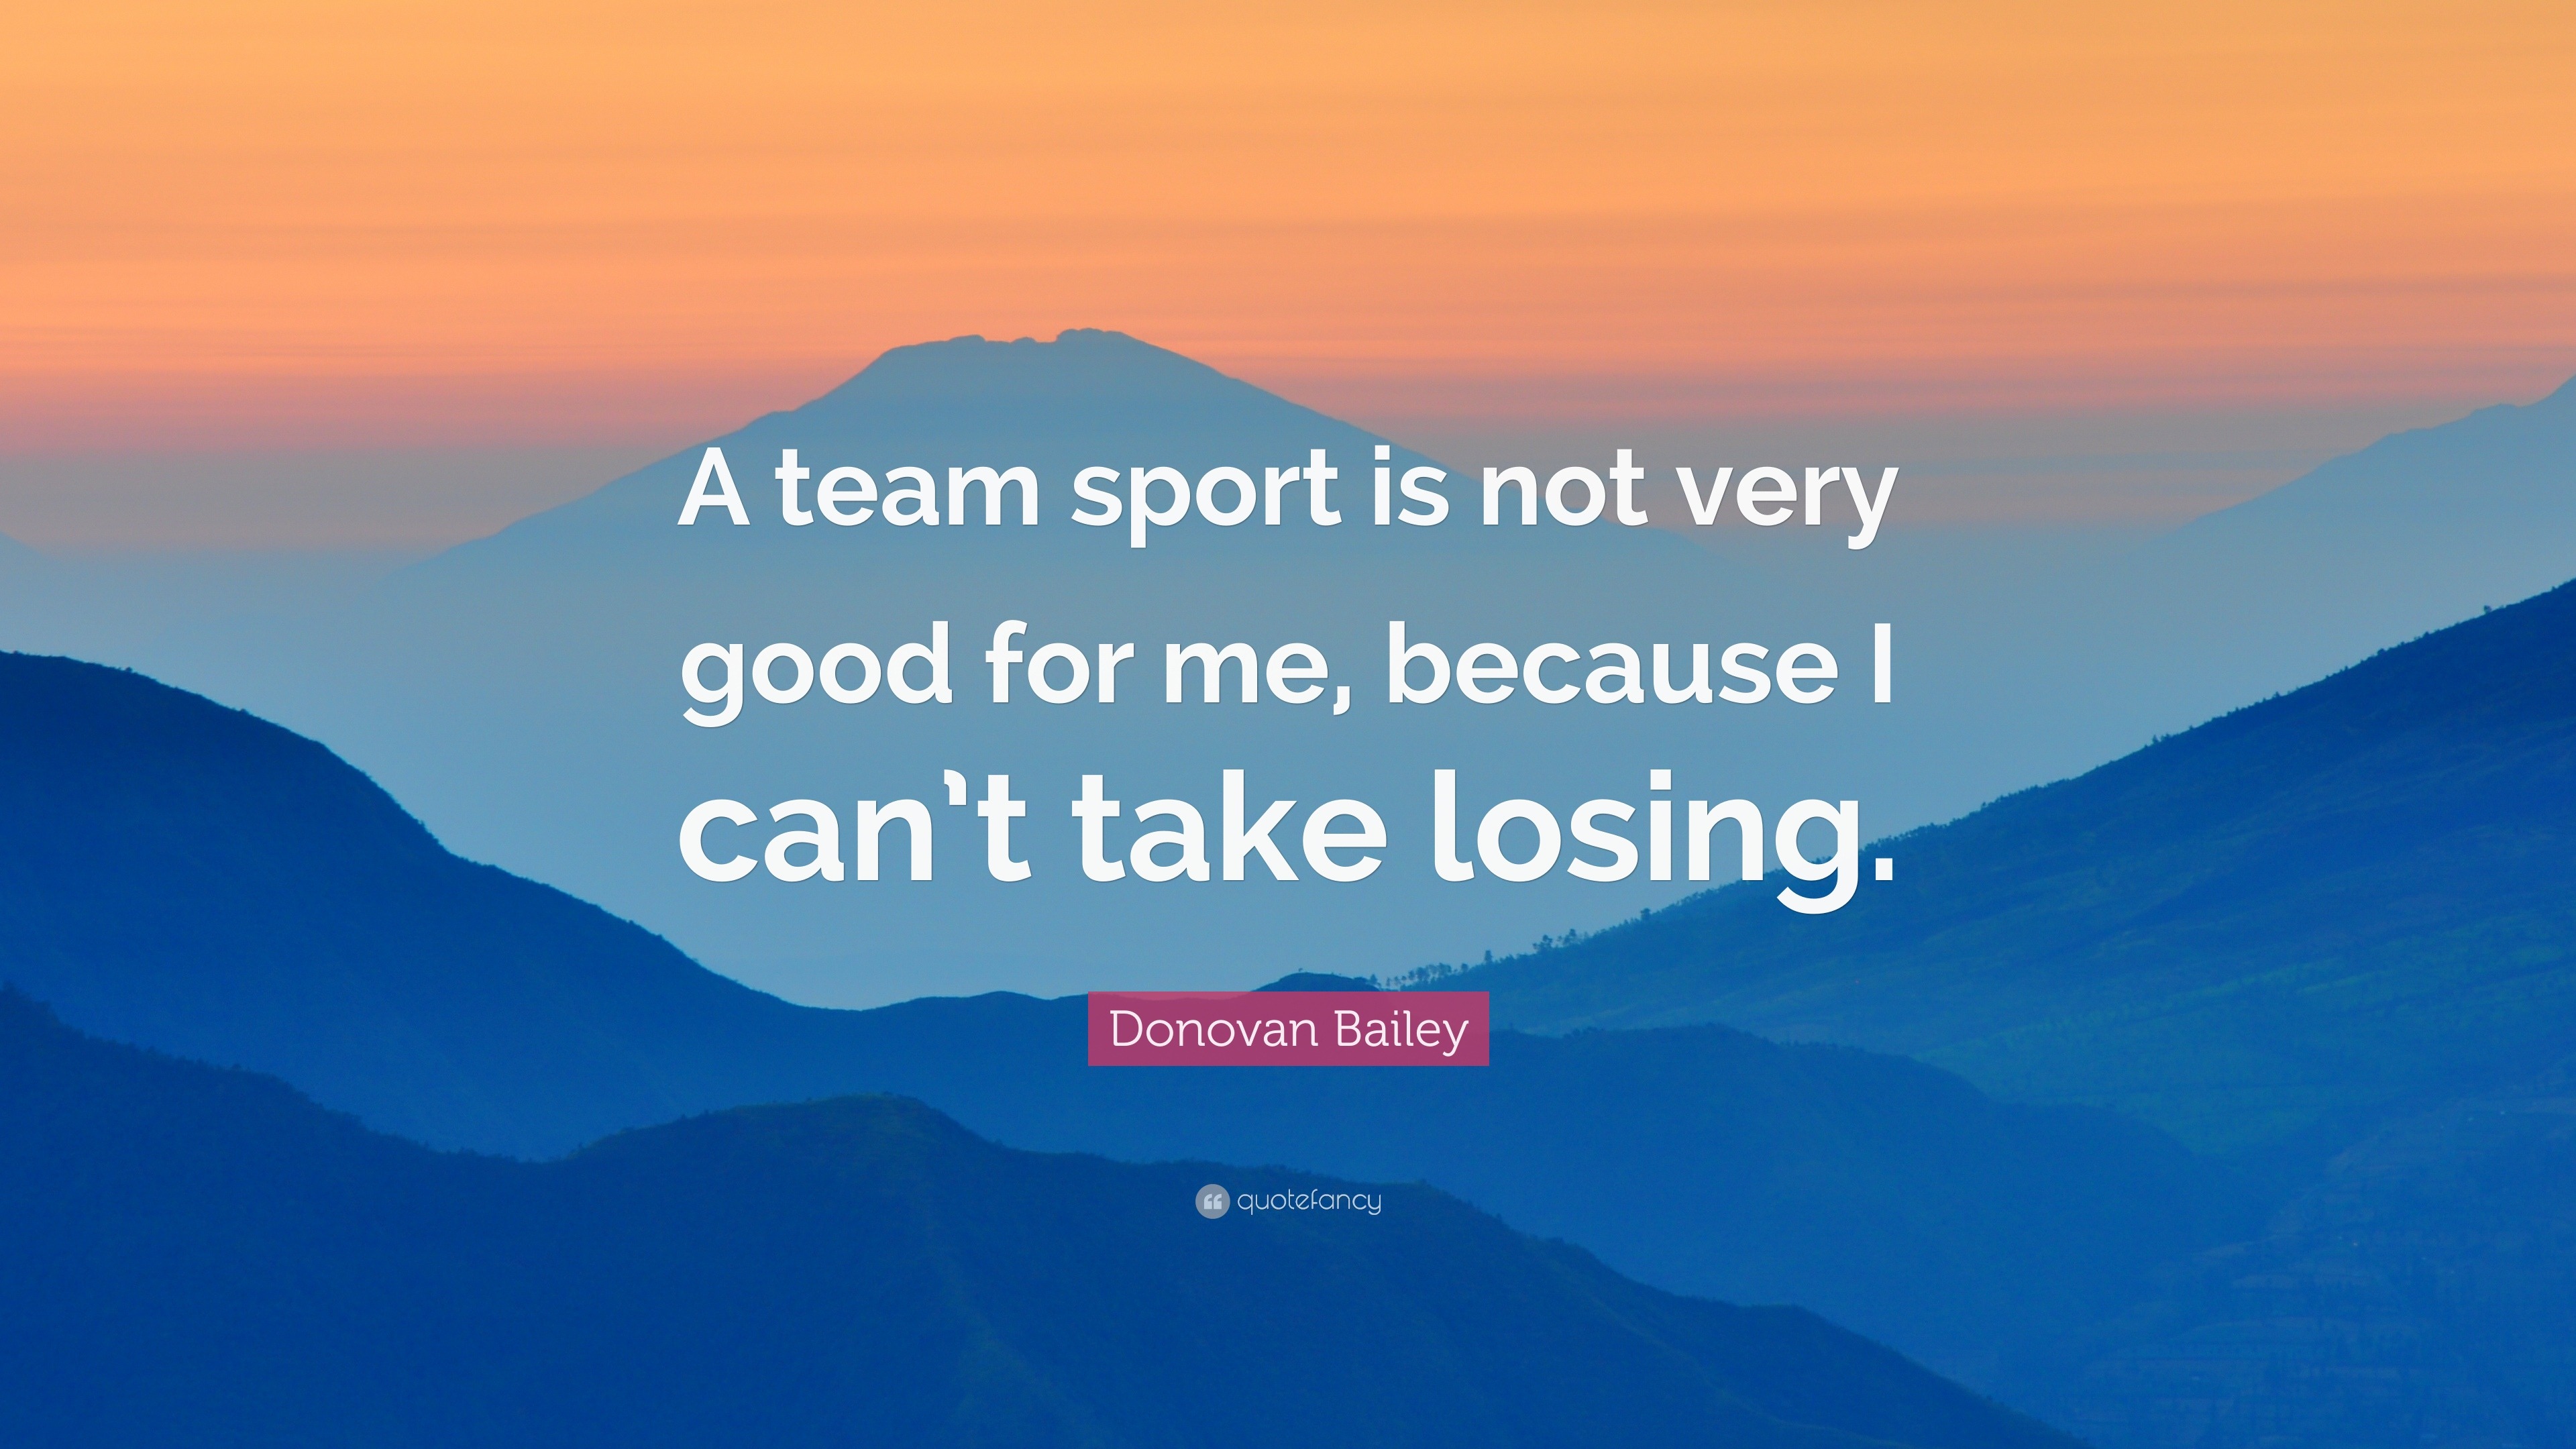 Donovan Bailey Quote: “A team sport is not very good for me, because I ...